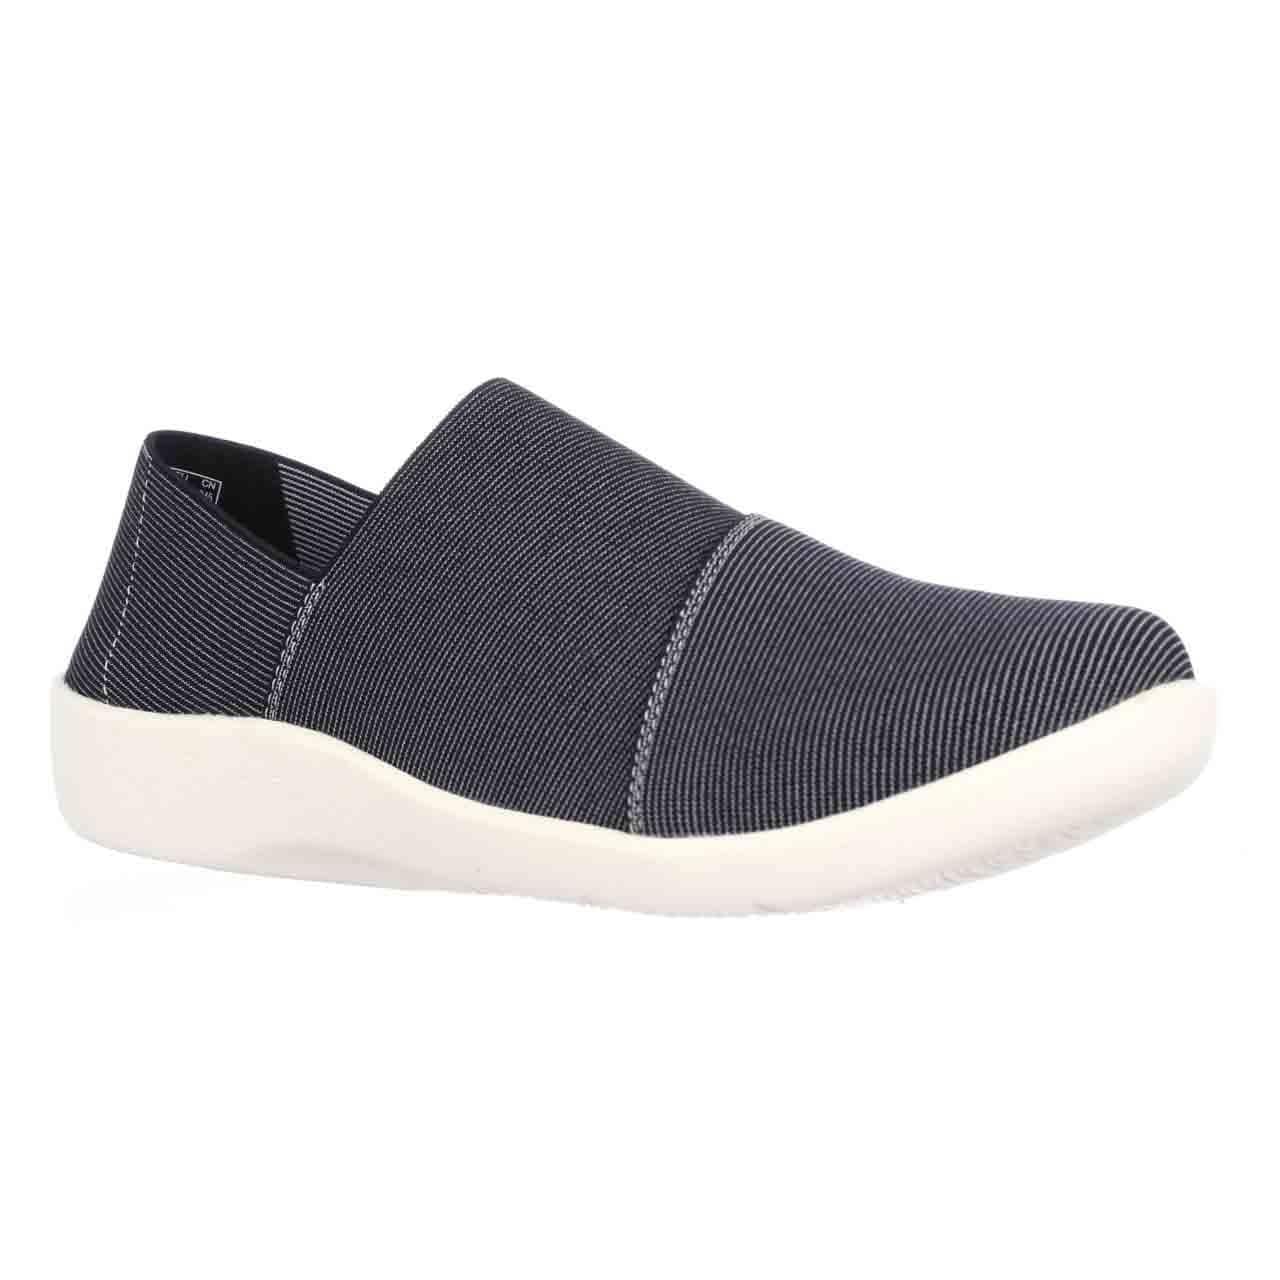 where can i buy clarks cloudsteppers